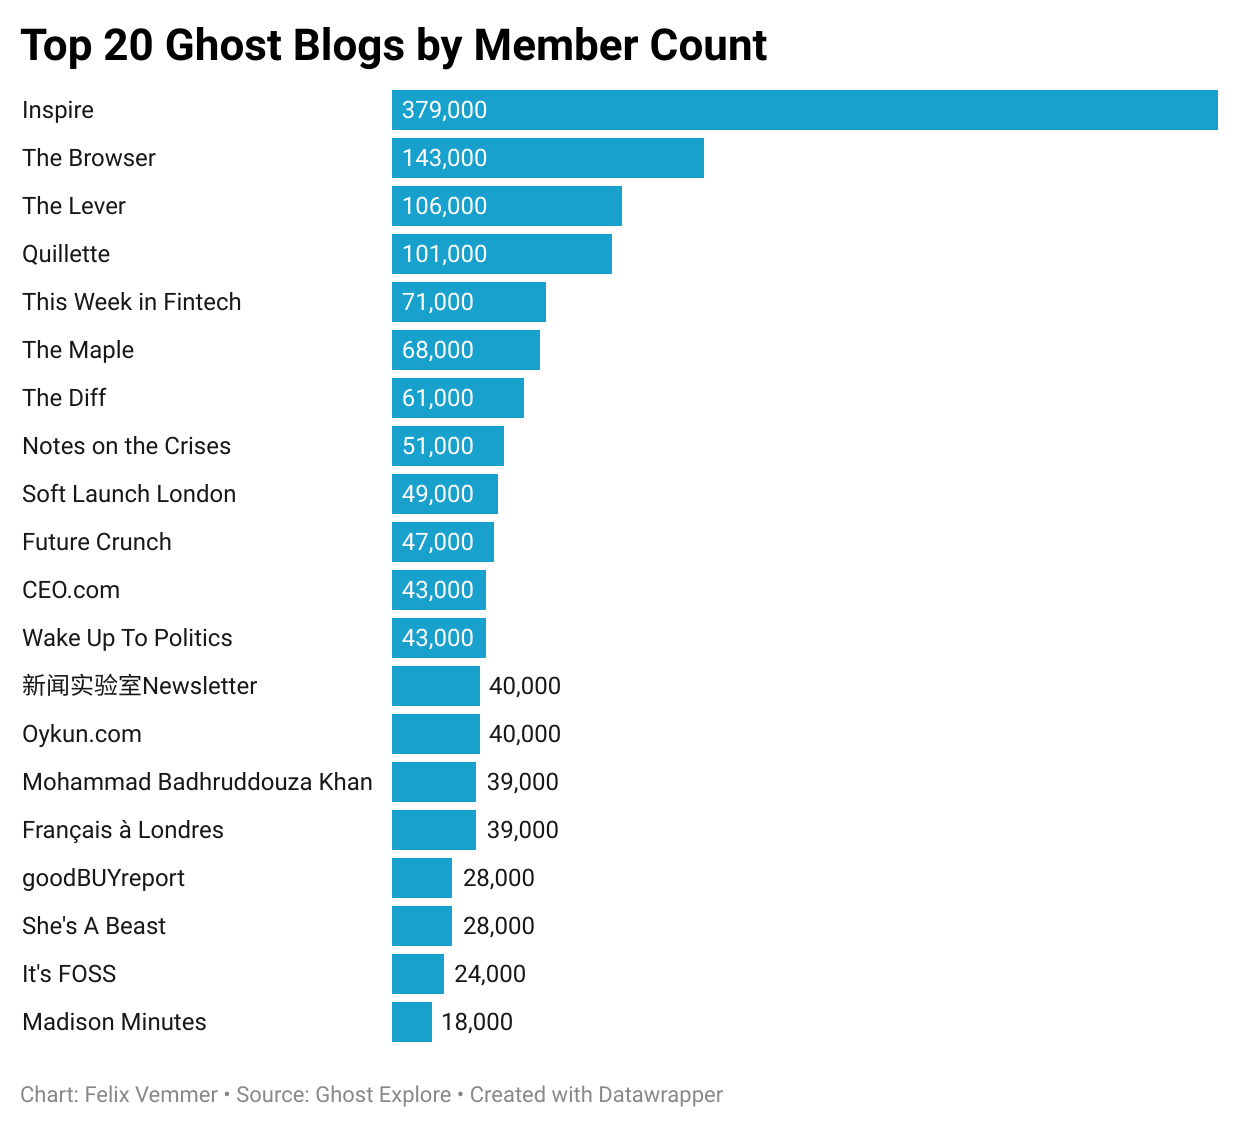 Top 20 most subscribed Ghost blogs, ranked by their member count